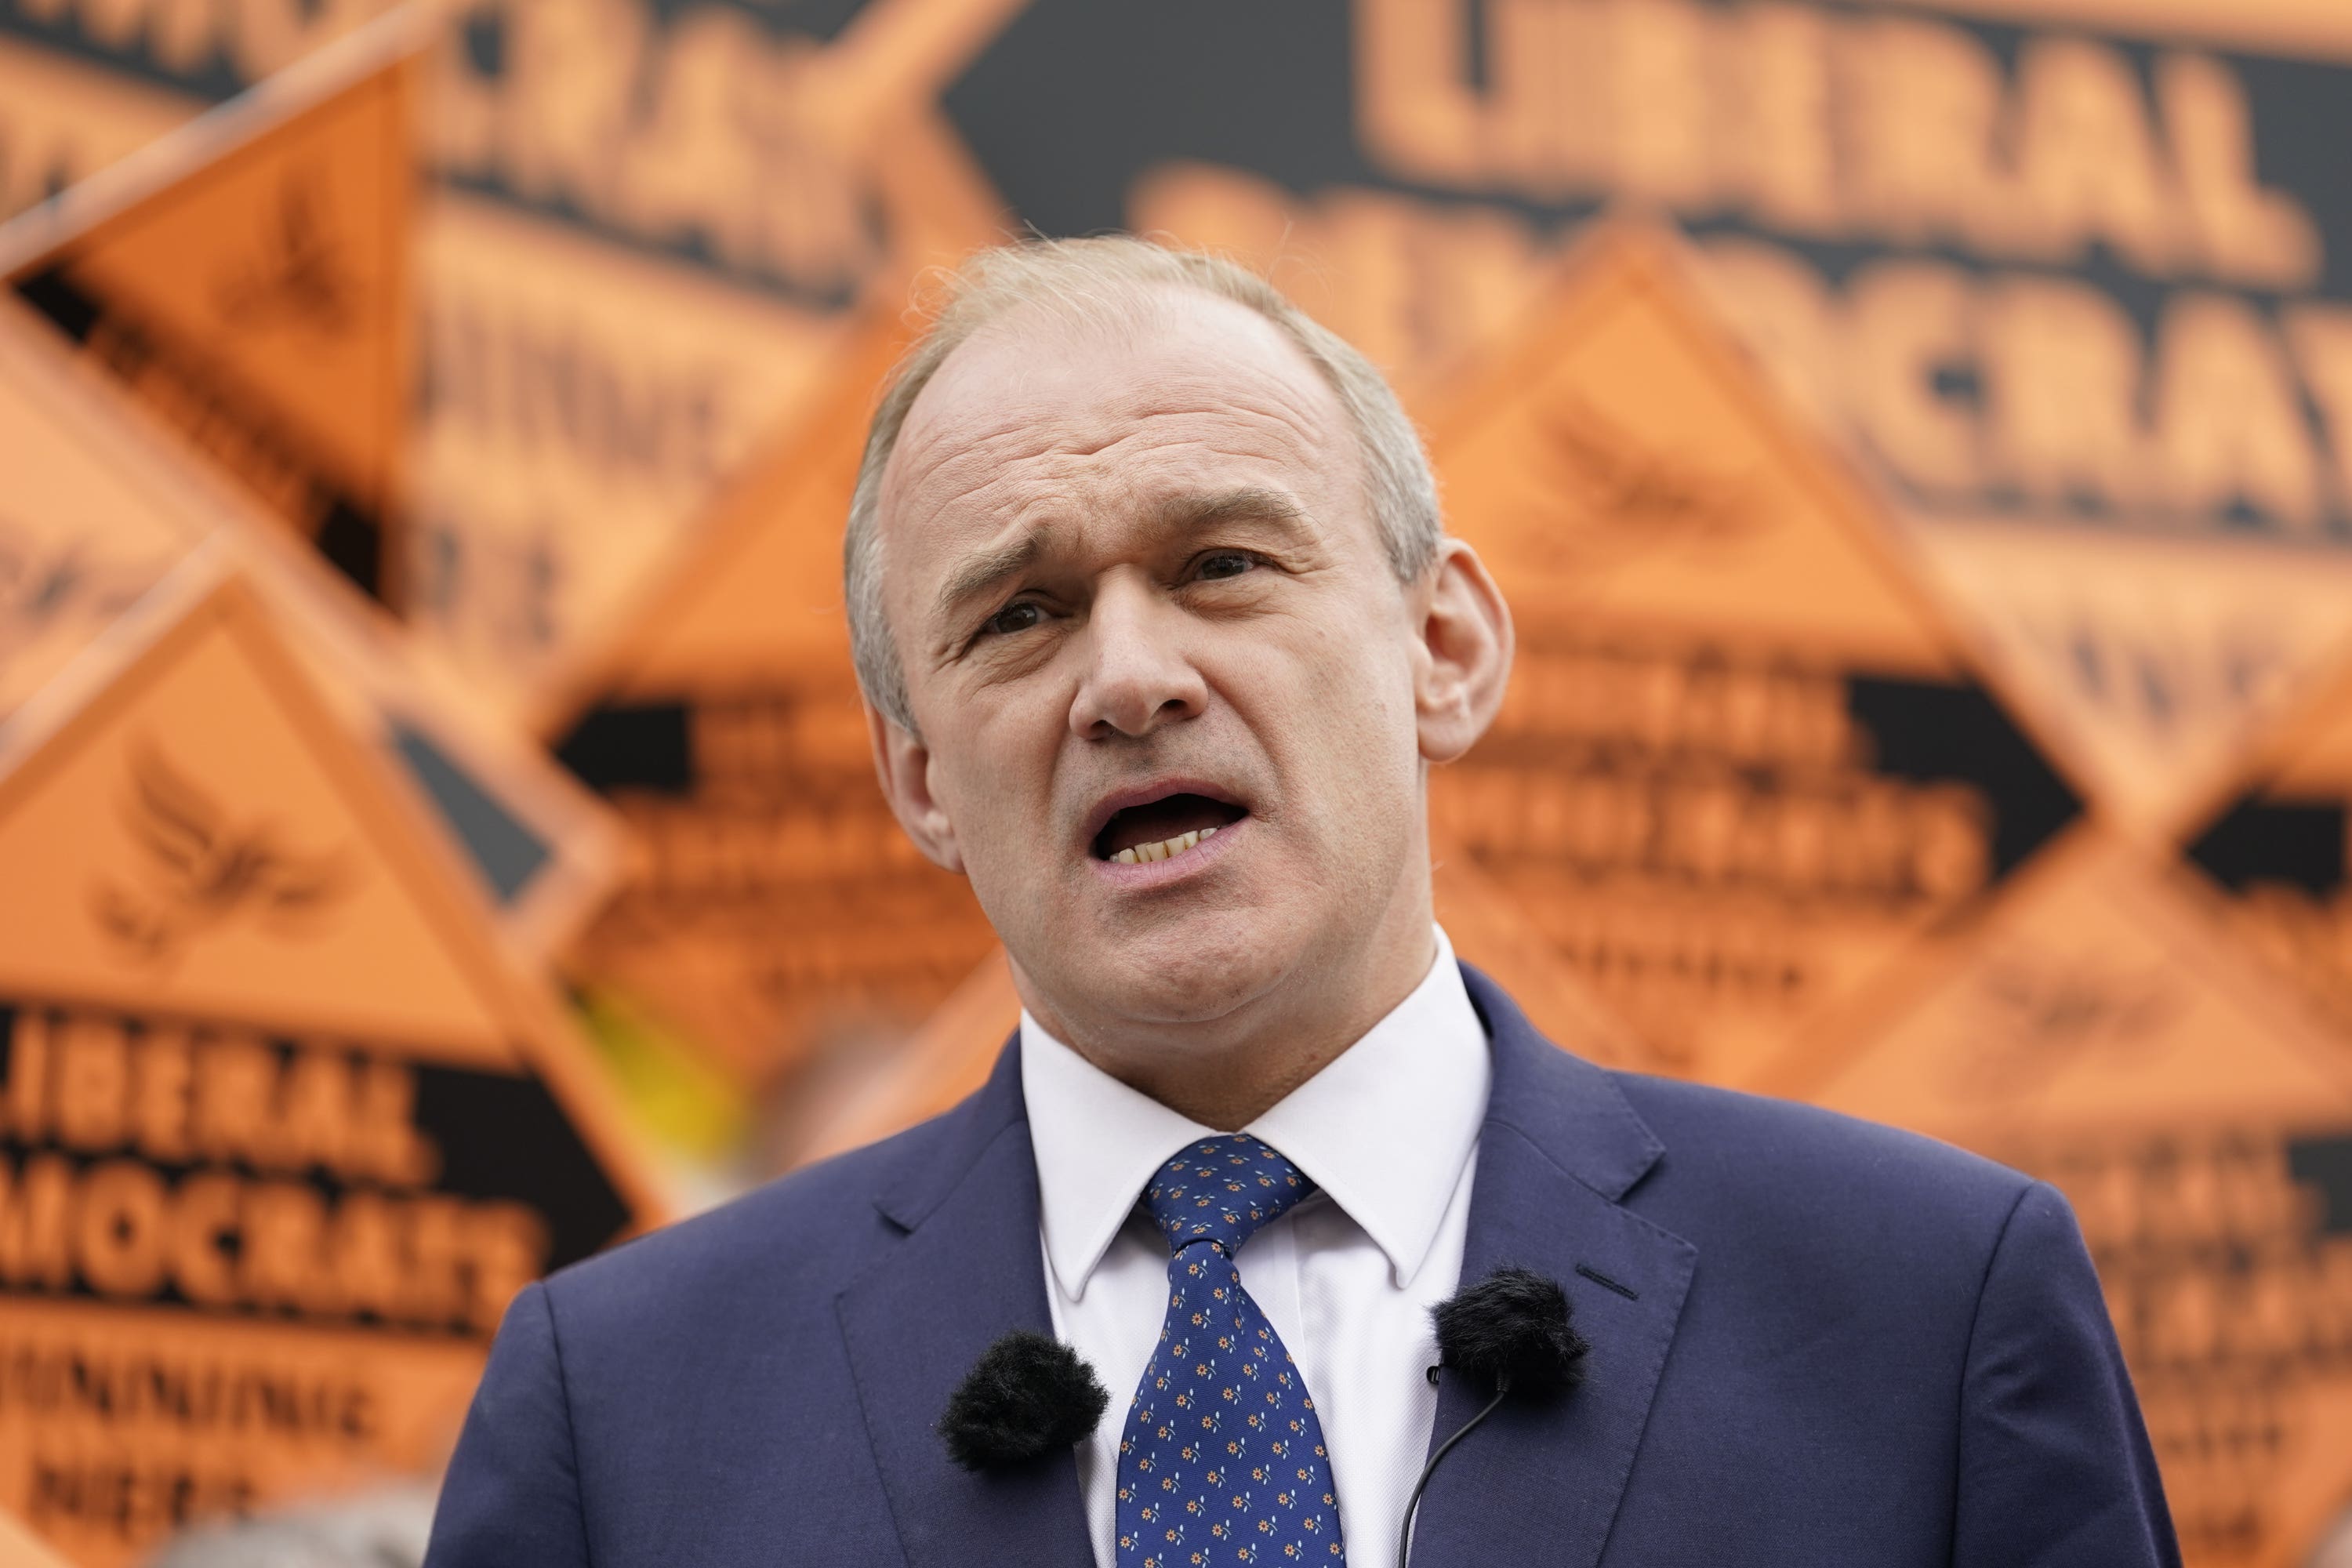 Ed Davey may not be in government any time soon but he has a chance to rebuild the party’s shrunken parliamentary group